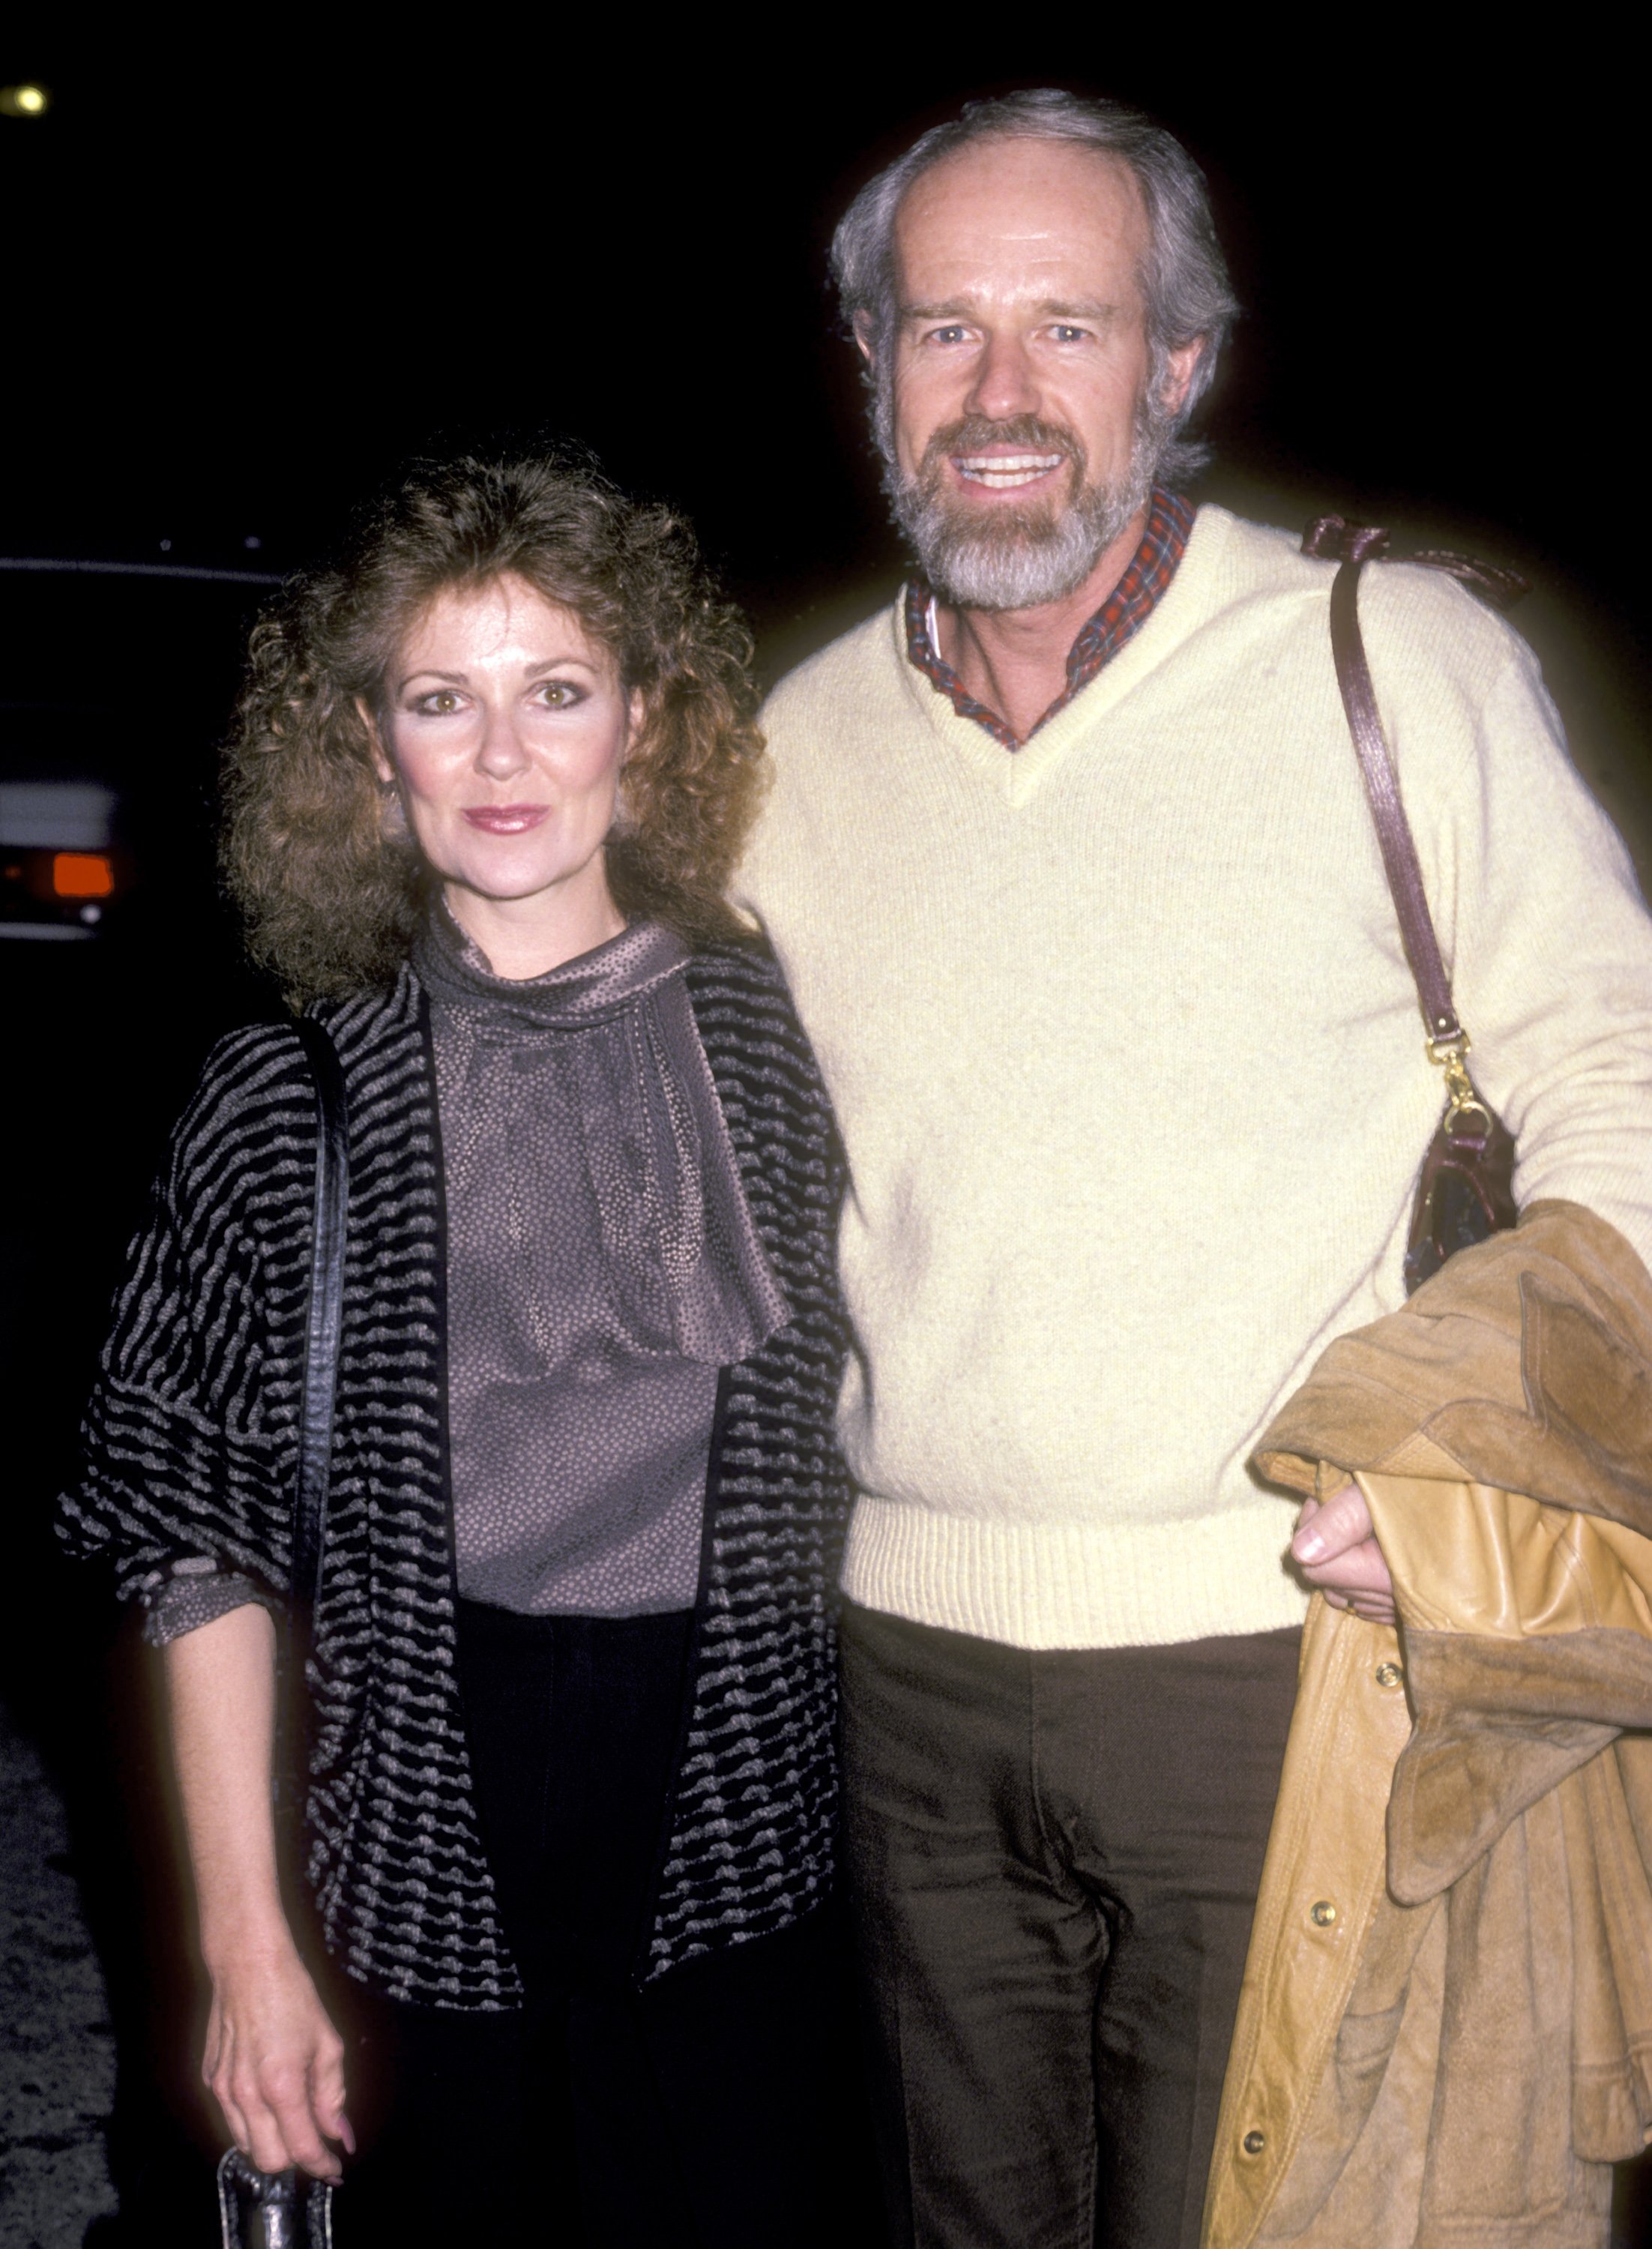 Shelley Fabares and Mike Farrell attend the Fundraiser Benefit for Senator Christopher Dodd at Bayshore Bowling Alley on December 5, 1985 in Los Angeles, California. / Source: Getty Images